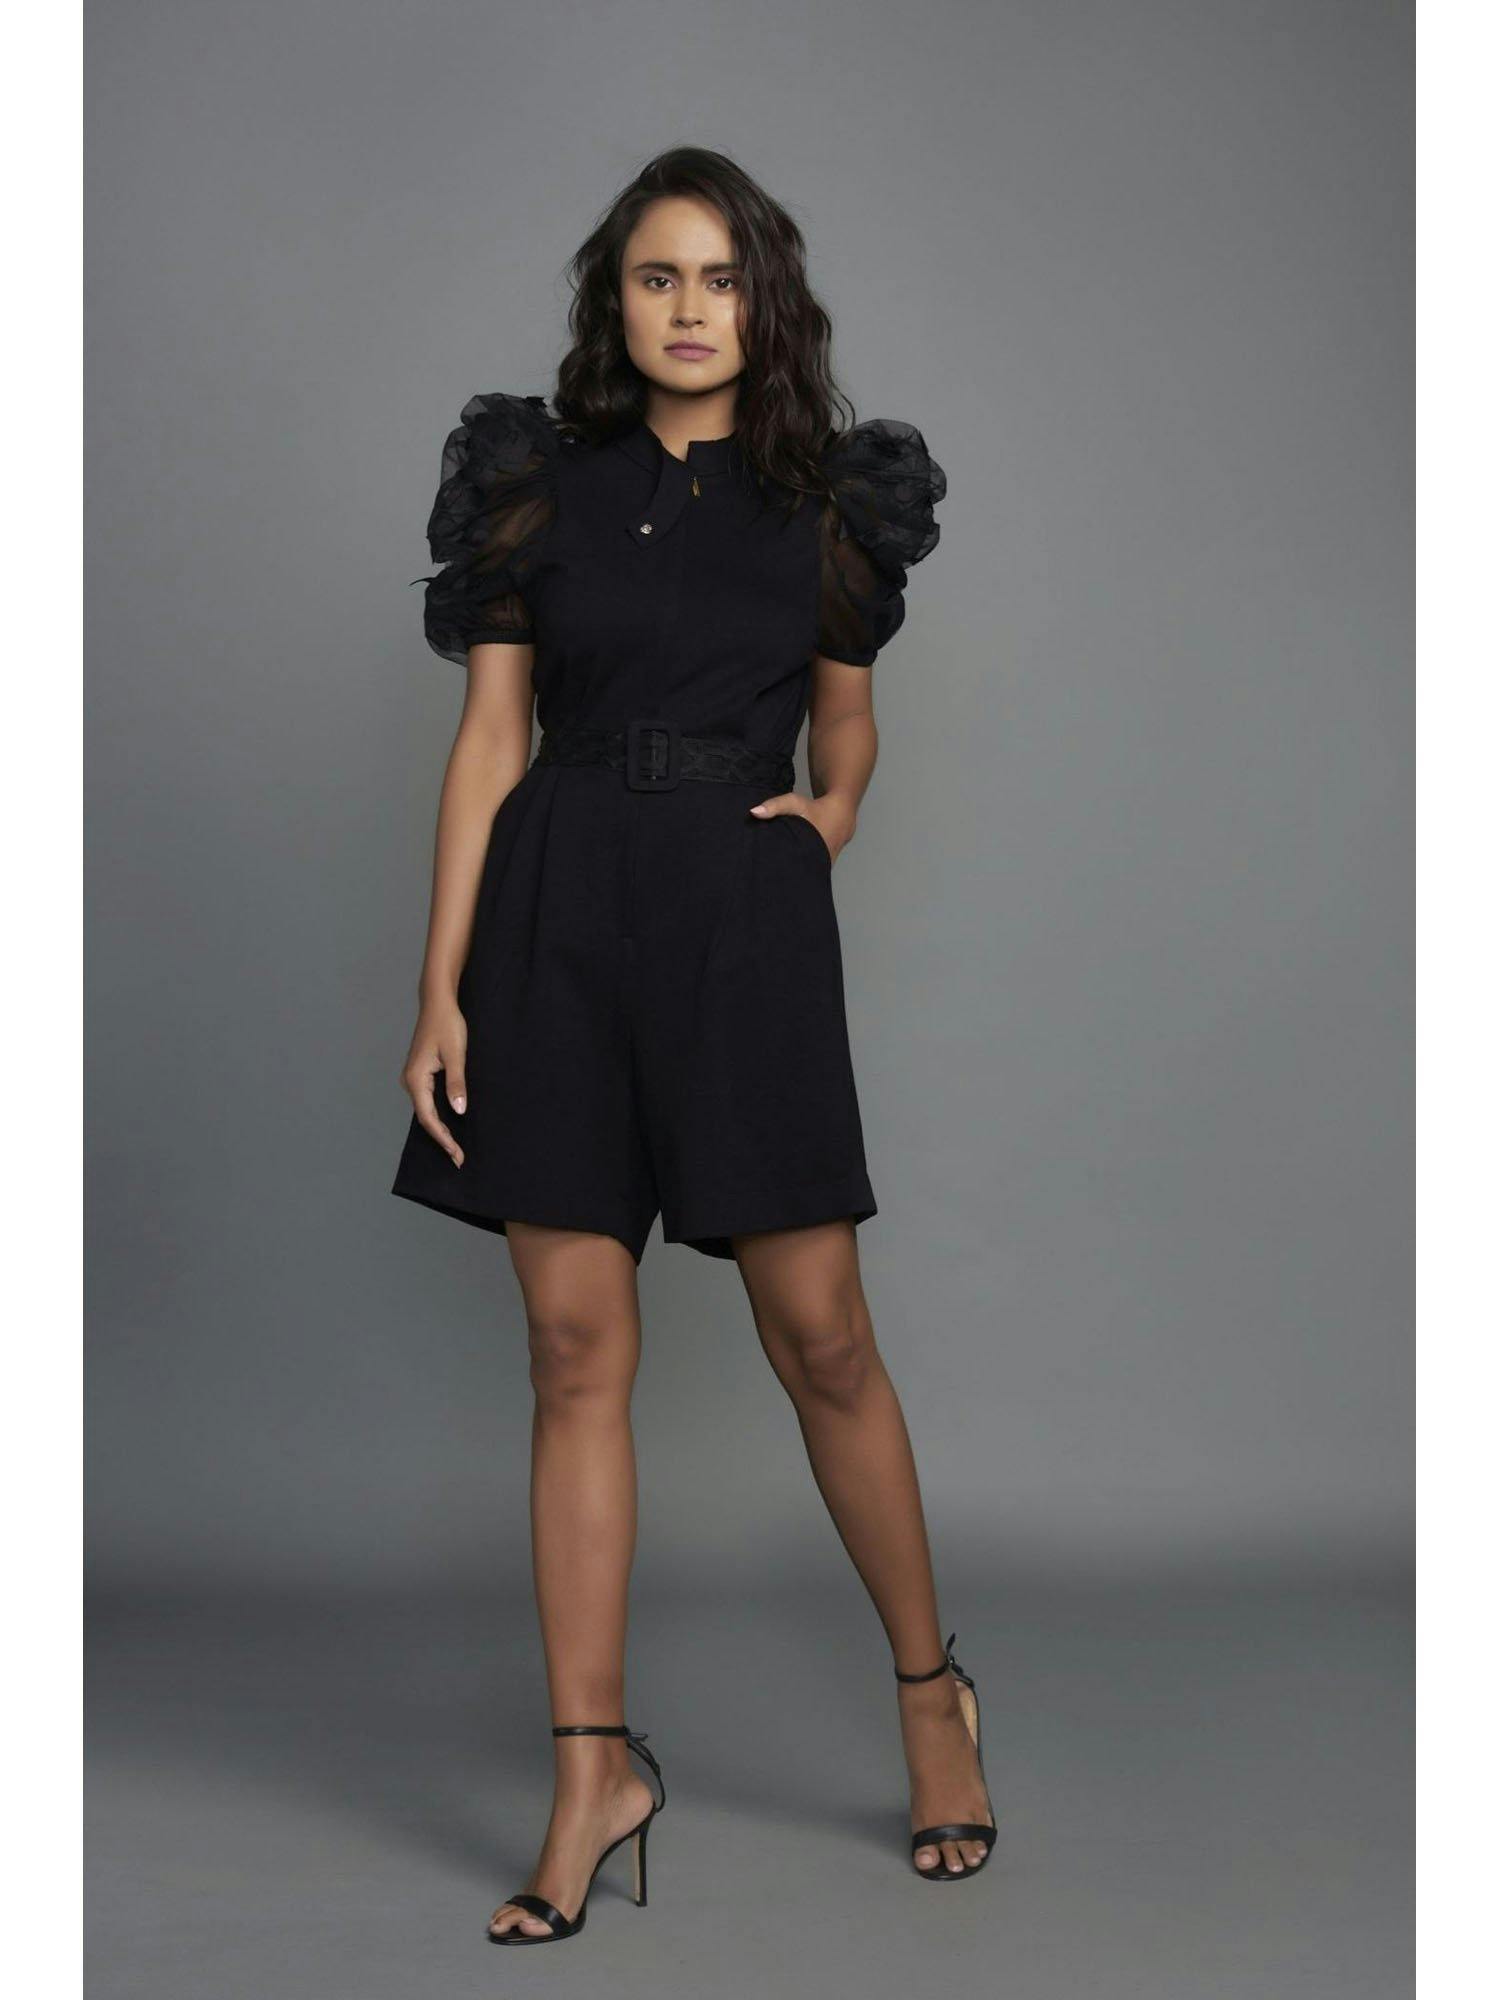 black playsuit with patchwork detailing and belt, a product by Deepika Arora